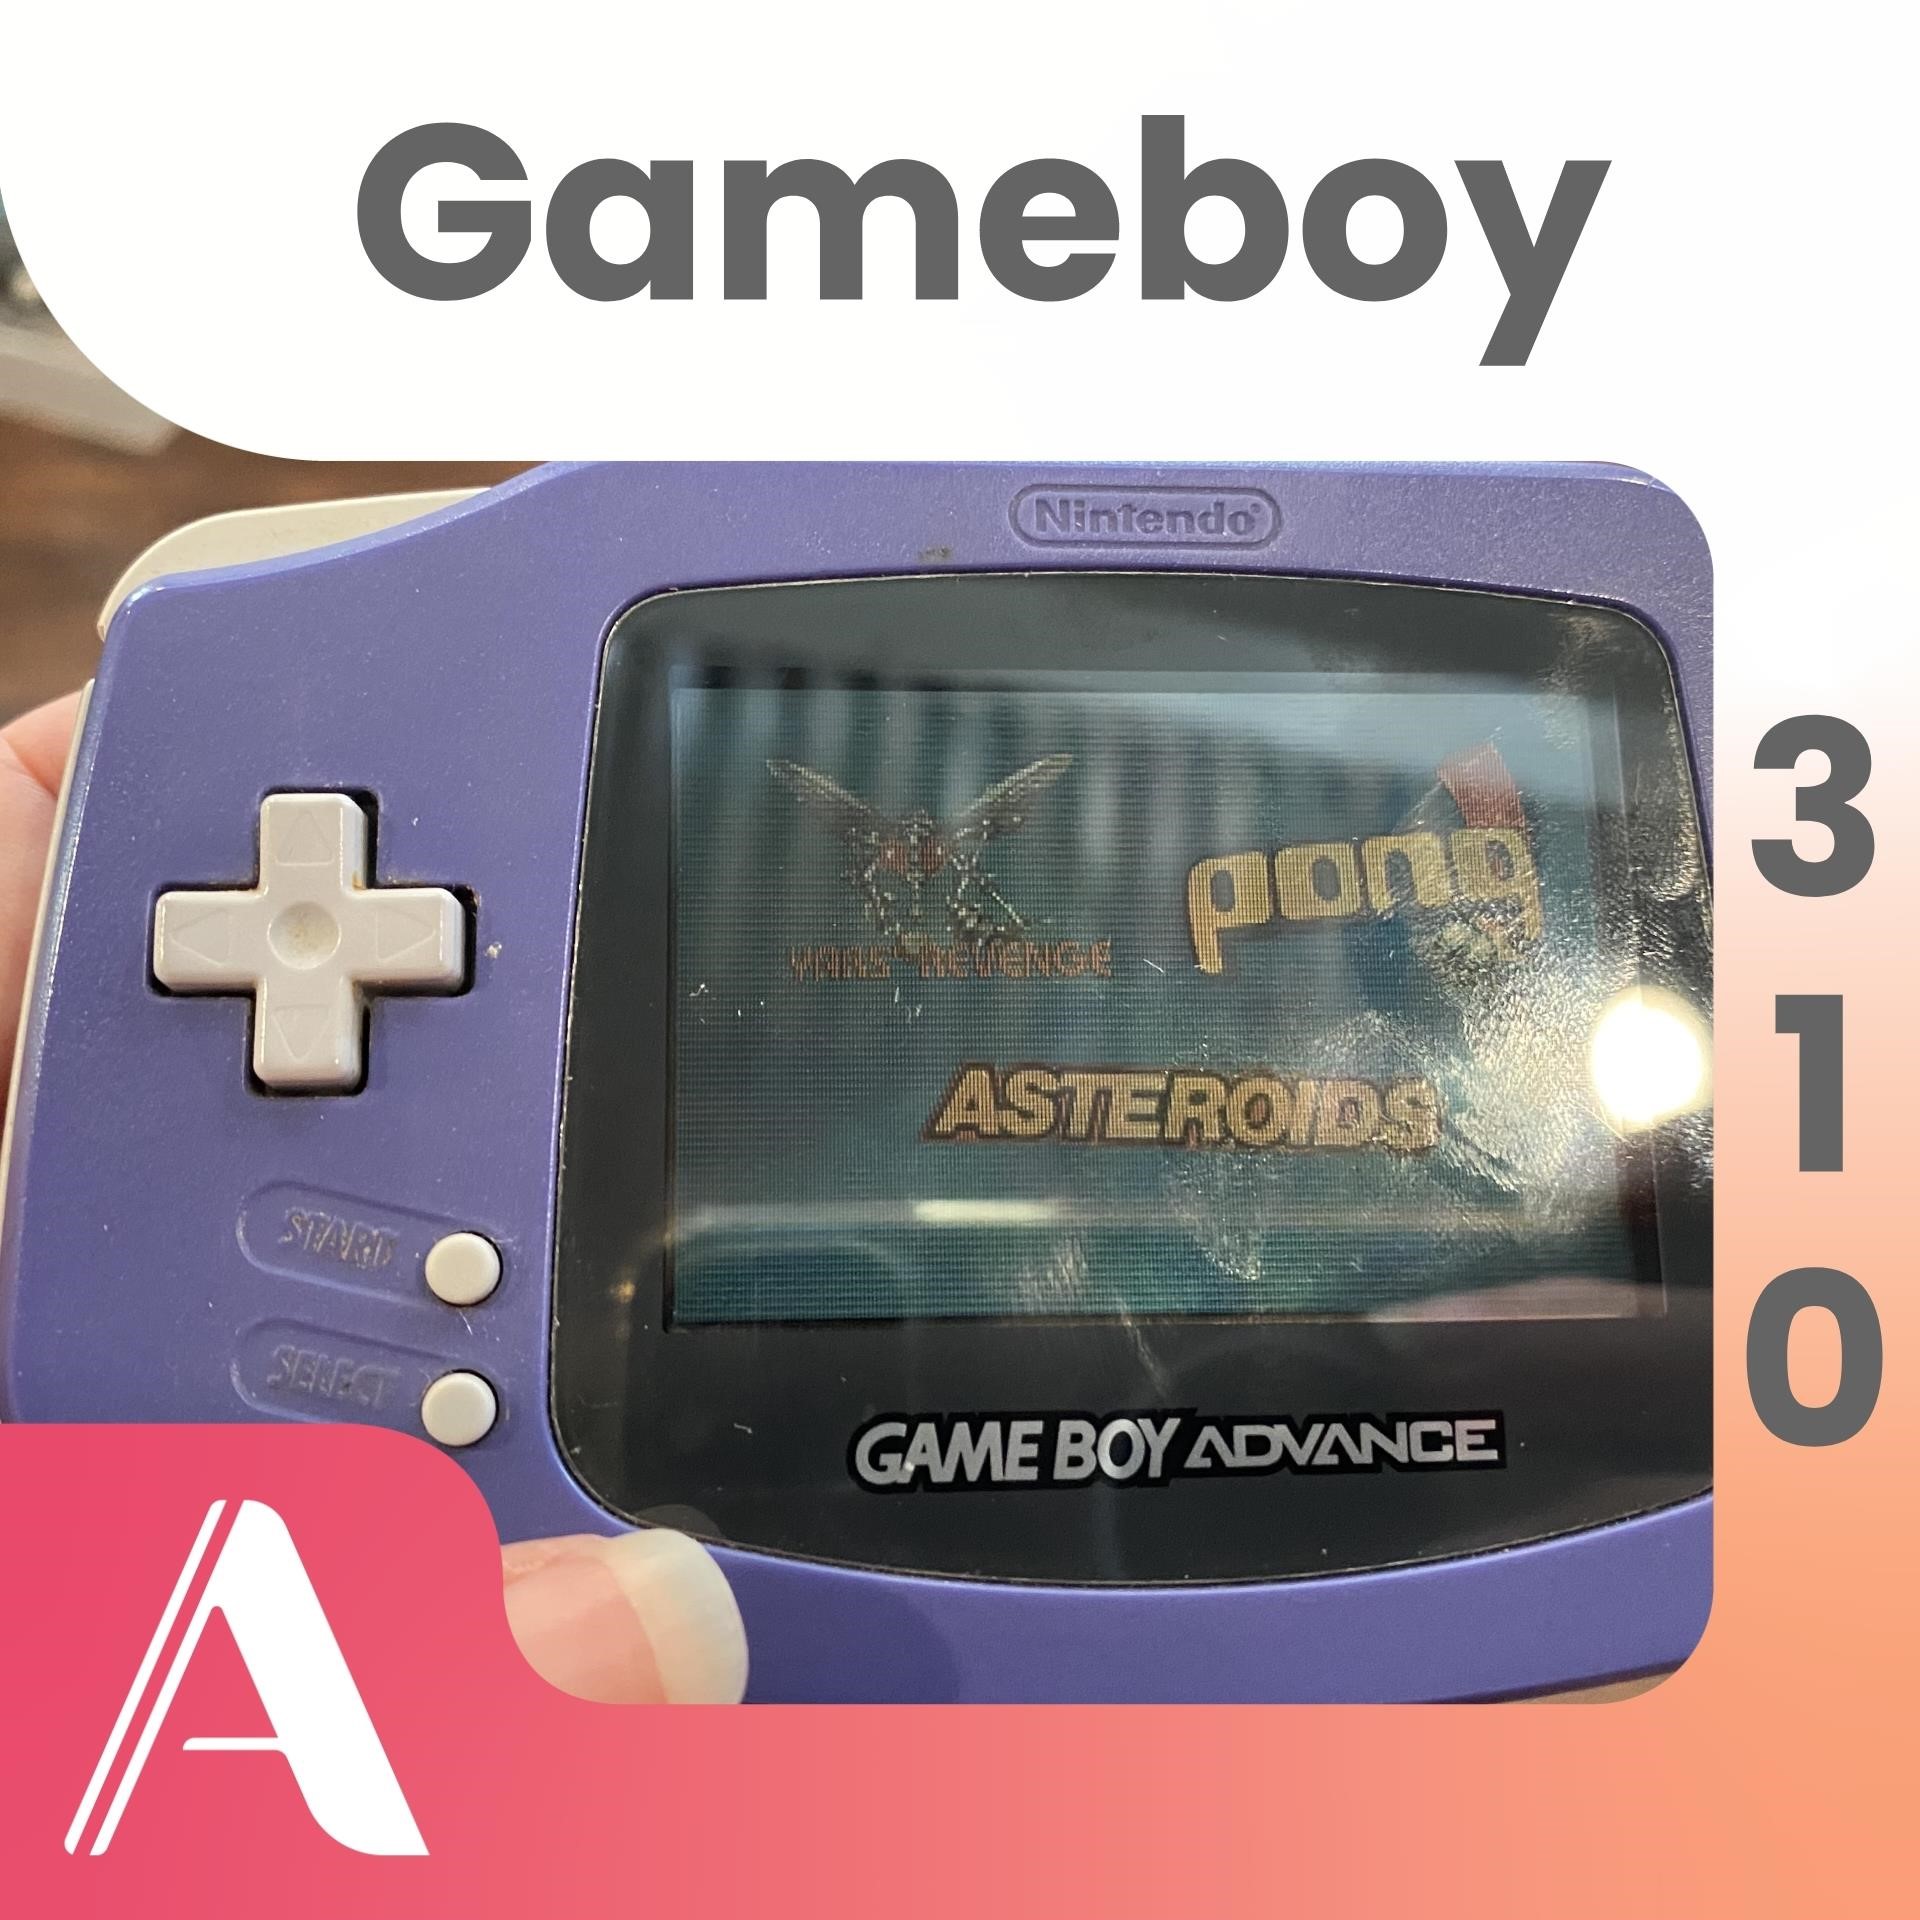 Game Boy Advance with 2 game cartridges and case